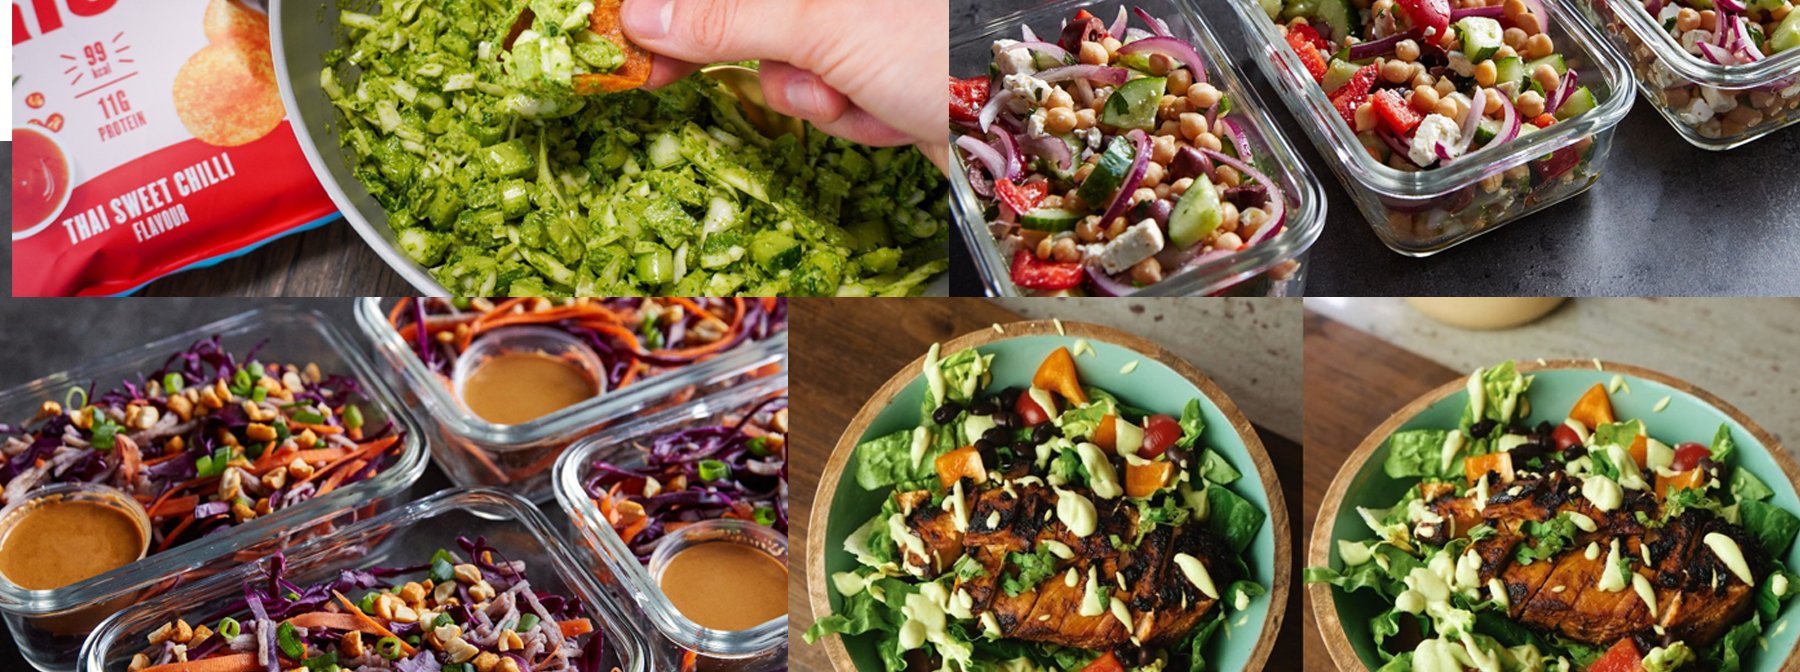 Spice Up Your Lunches With 6 Salad Recipes From 58p